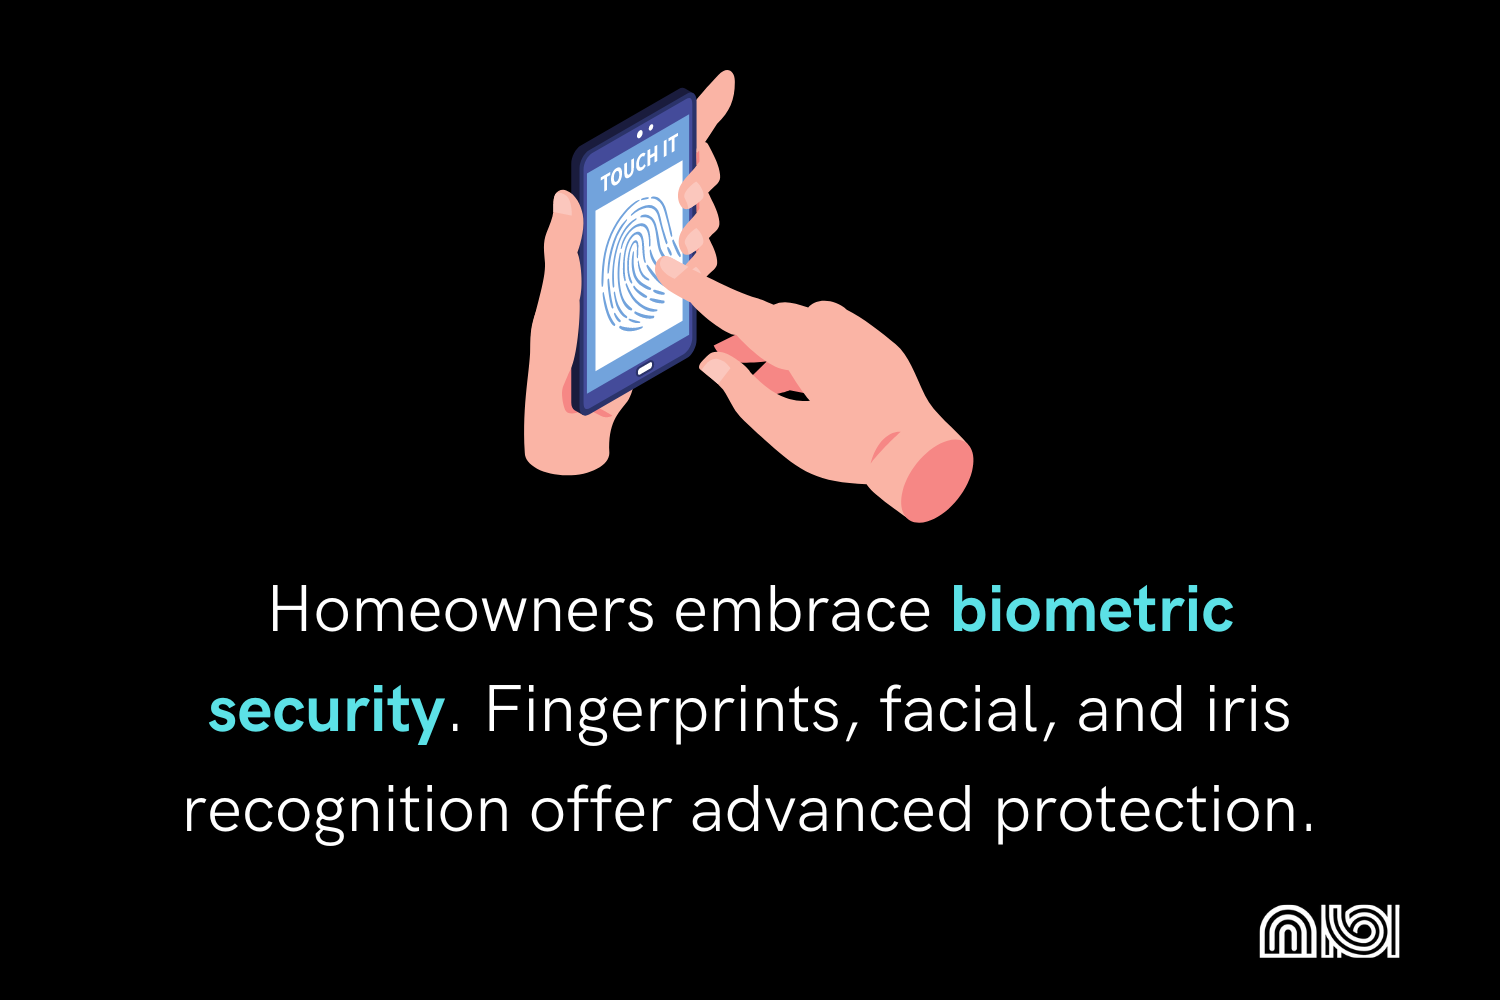 Biometric security systems use fingerprints, face recognition, and iris scans to identify legitimate users and protect homes from unauthorized access.